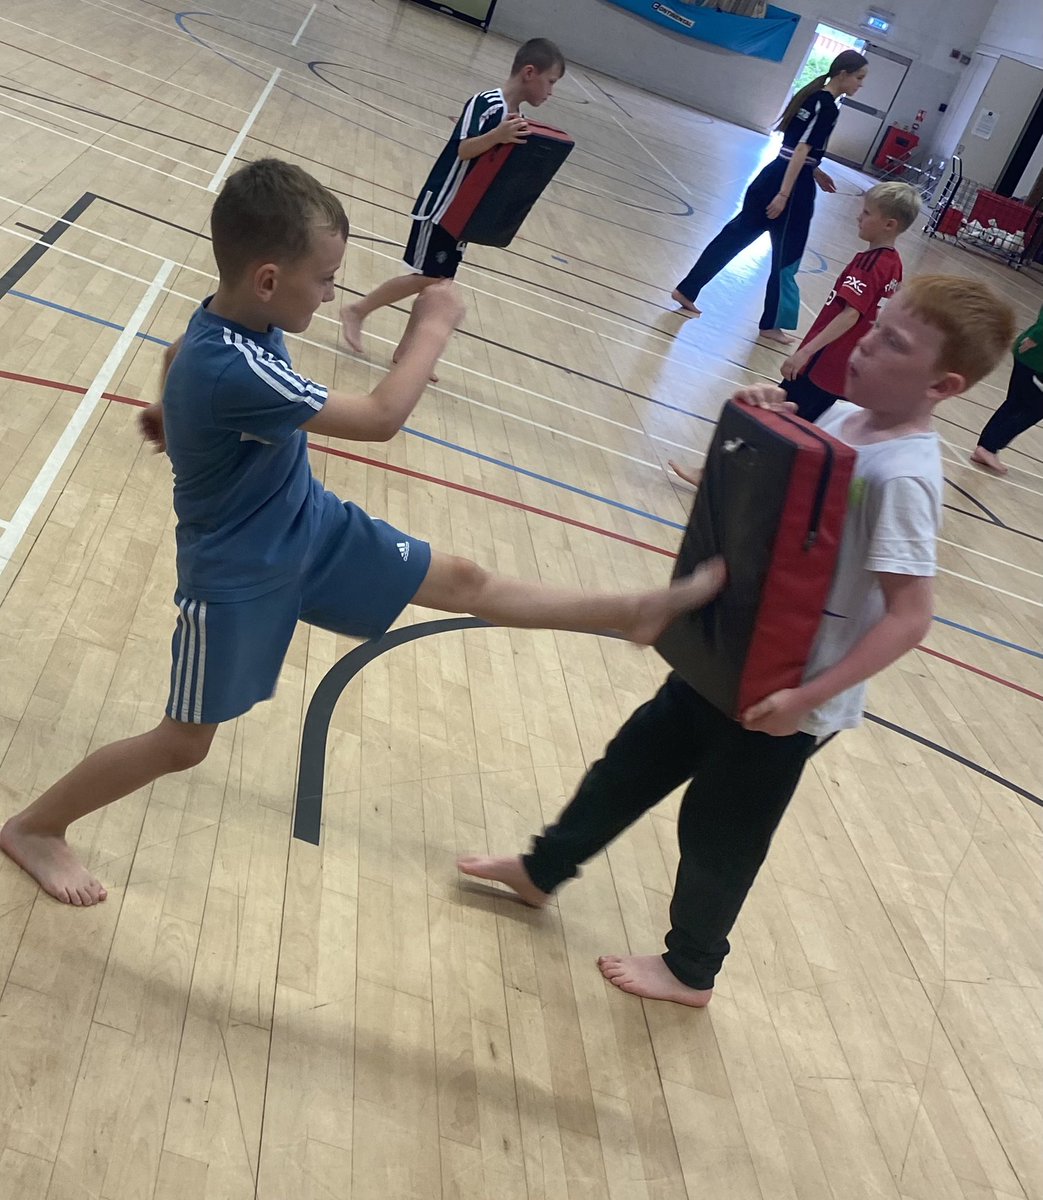 Afternoon session of kickboxing on todays multi sports camp in partnership with @Fuel_4_Fun here at #astleysportsvillage & @RSHS_HighSchool #HAF23 #dukinfield #tameside @SPT_Community